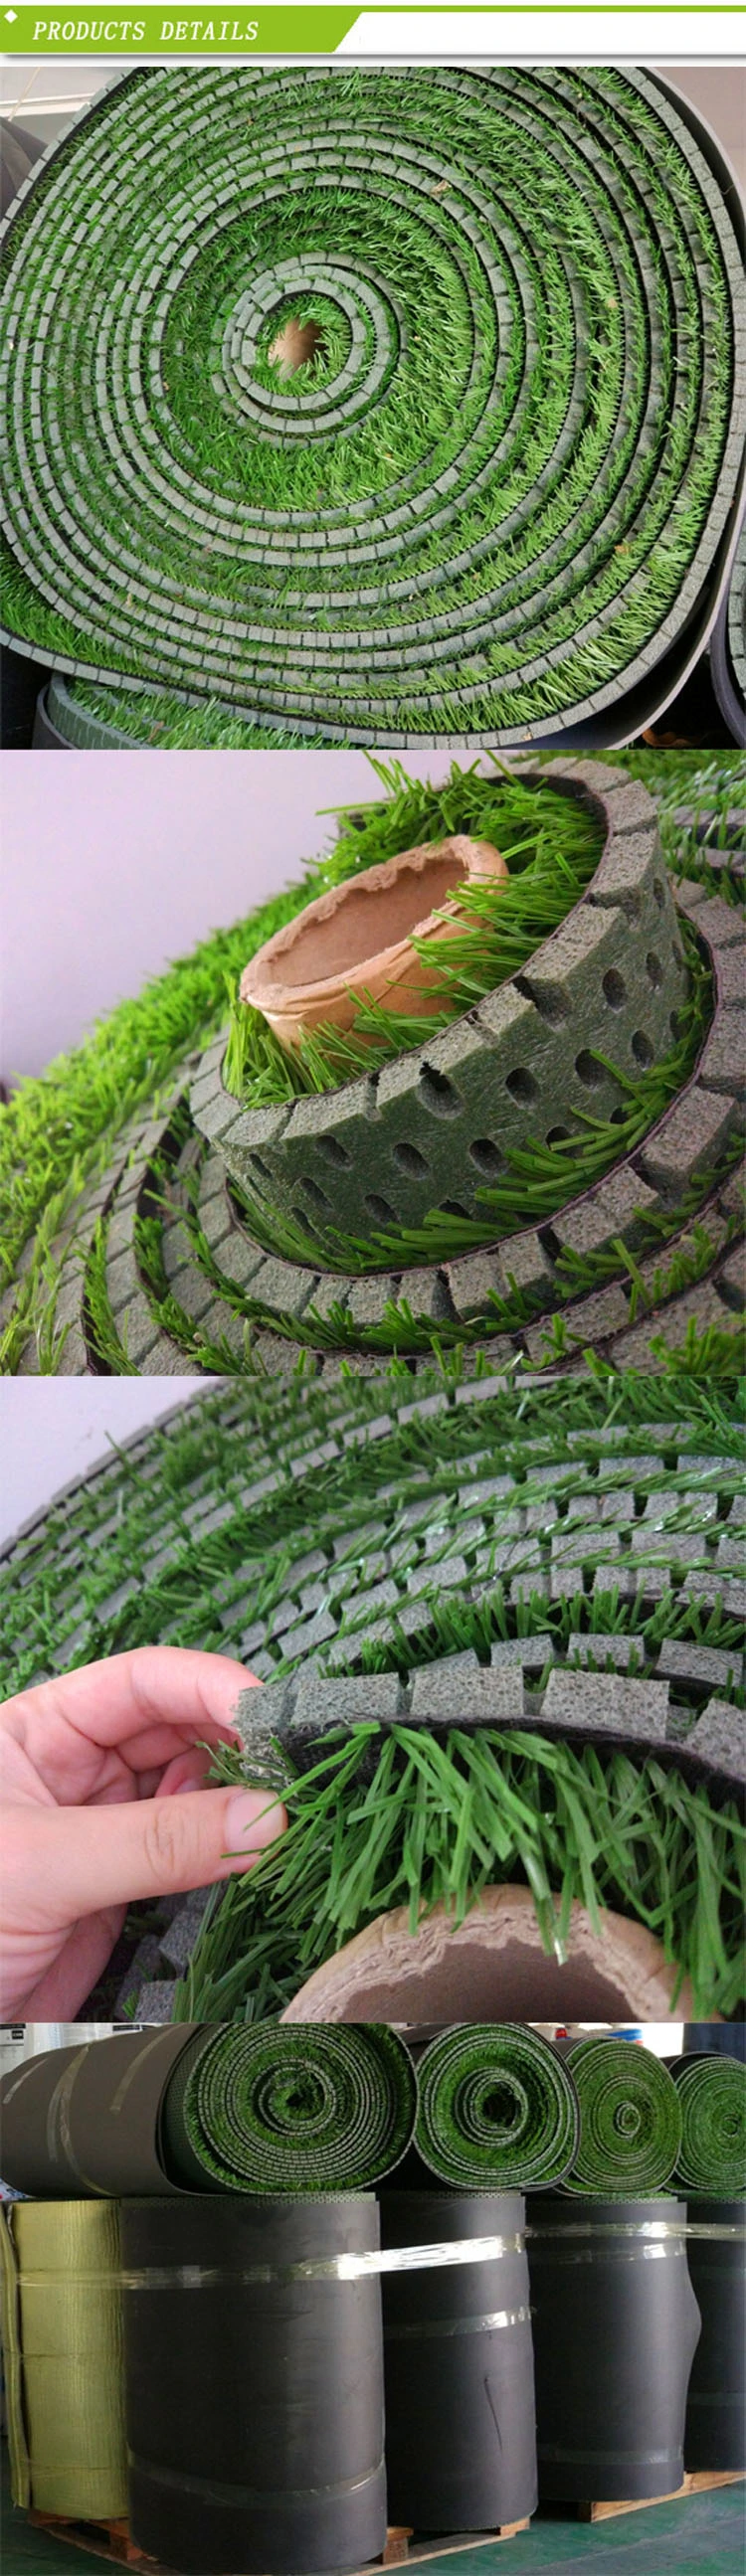 Artificial Grass Football Turf XPE Foam Carpet with Shock Absorption and Waterproof